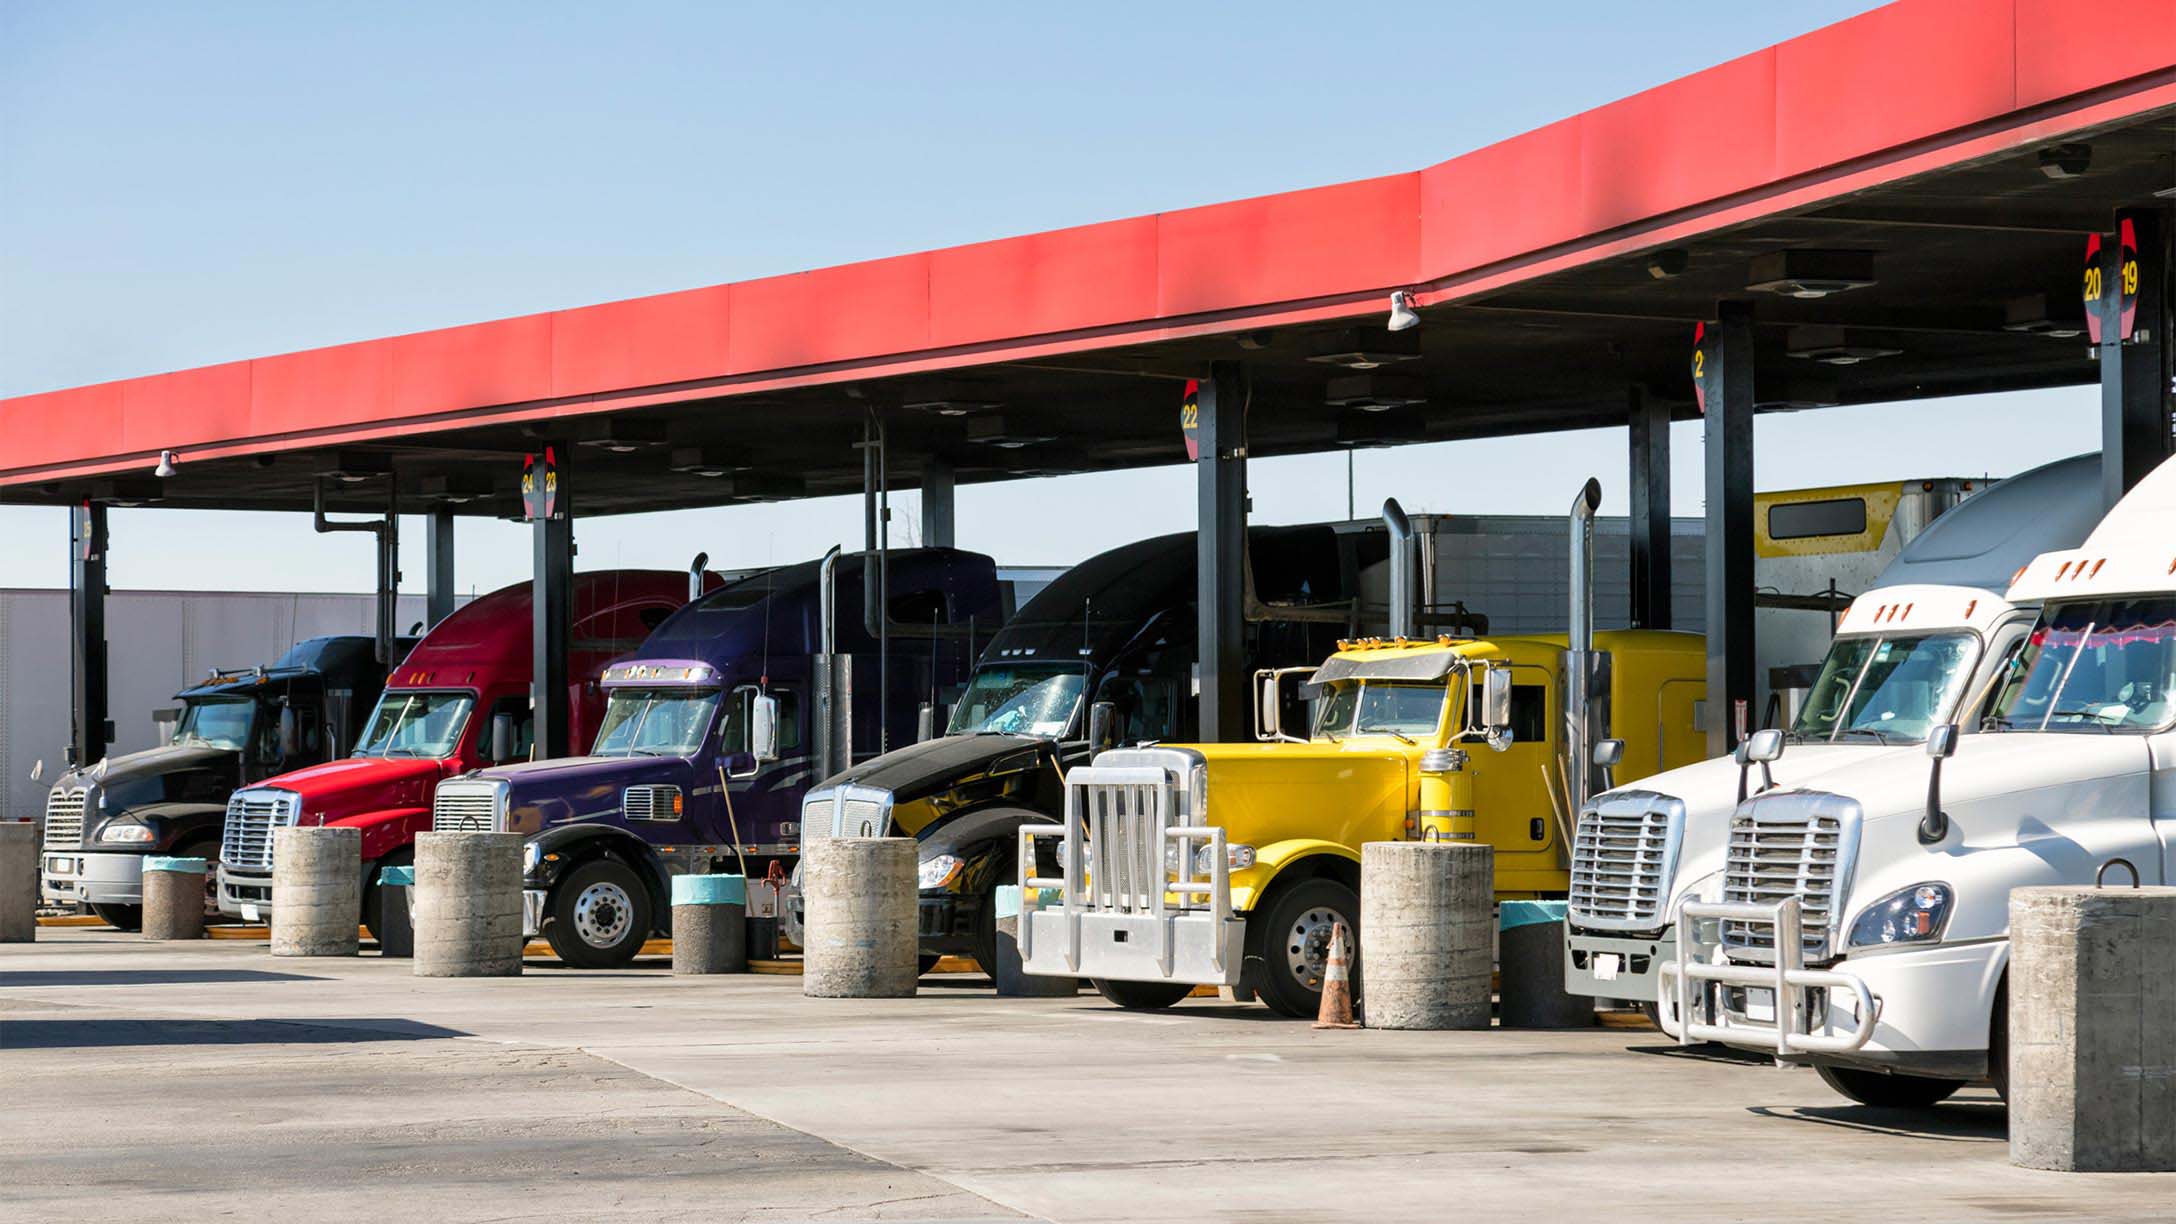 A row of semi trucks lined up at a fuel station